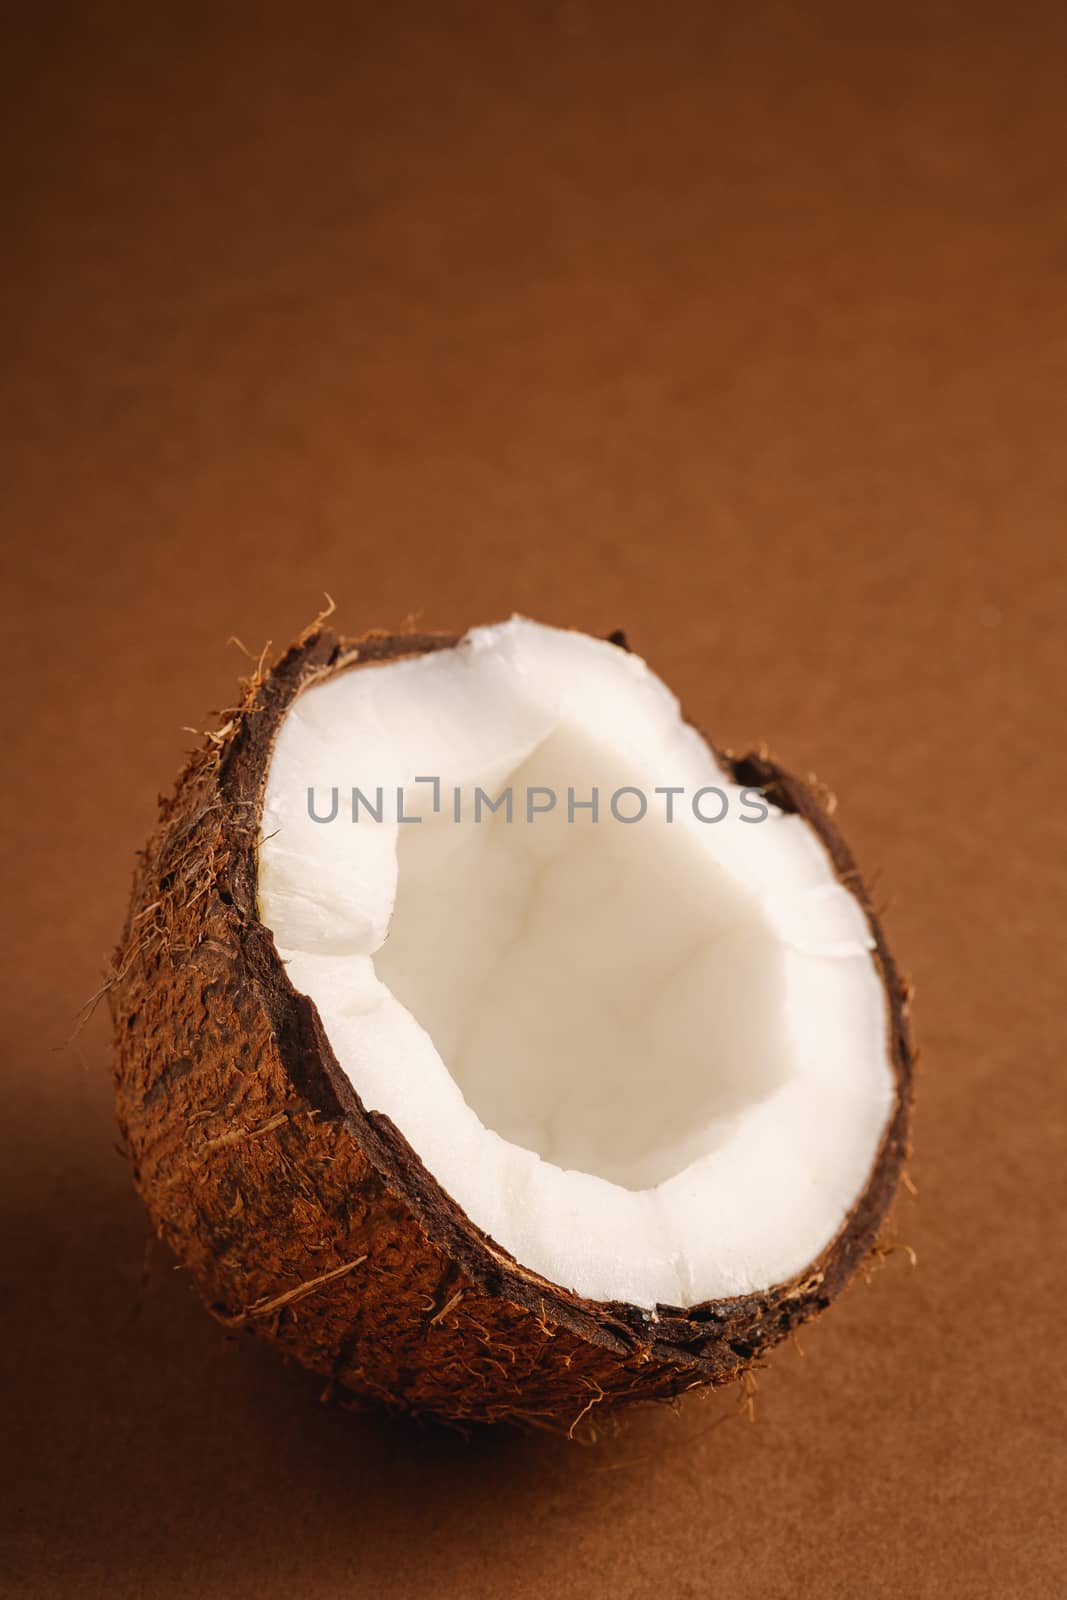 Single coconut fruit on brown plain background, abstract food tropical concept, angle view macro